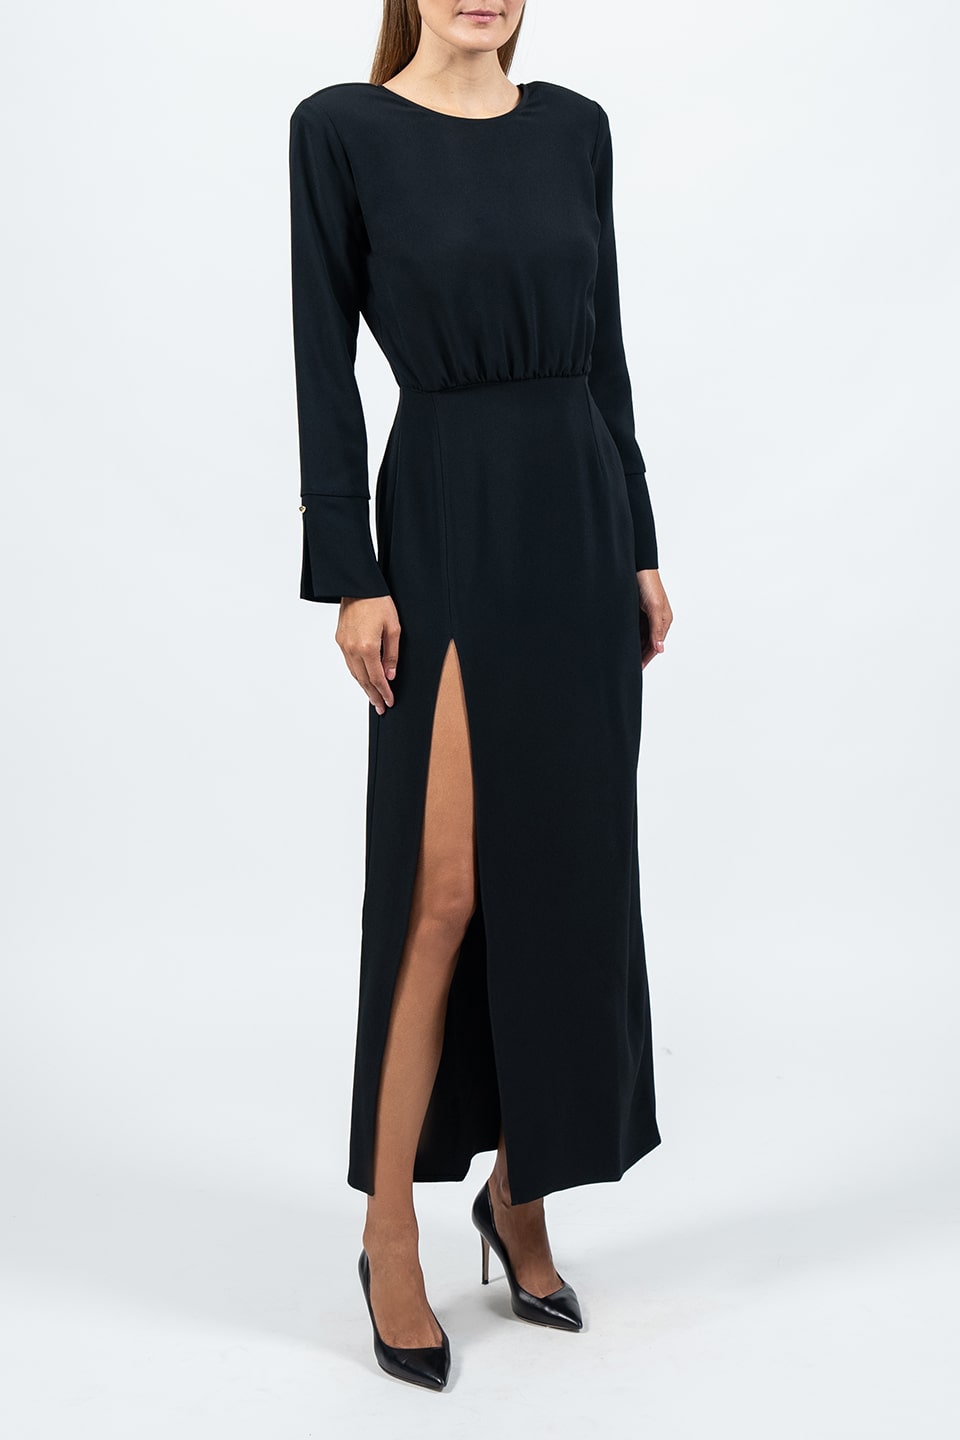 Designer Black Midi dresses, shop online with free delivery in UAE. Product gallery 2